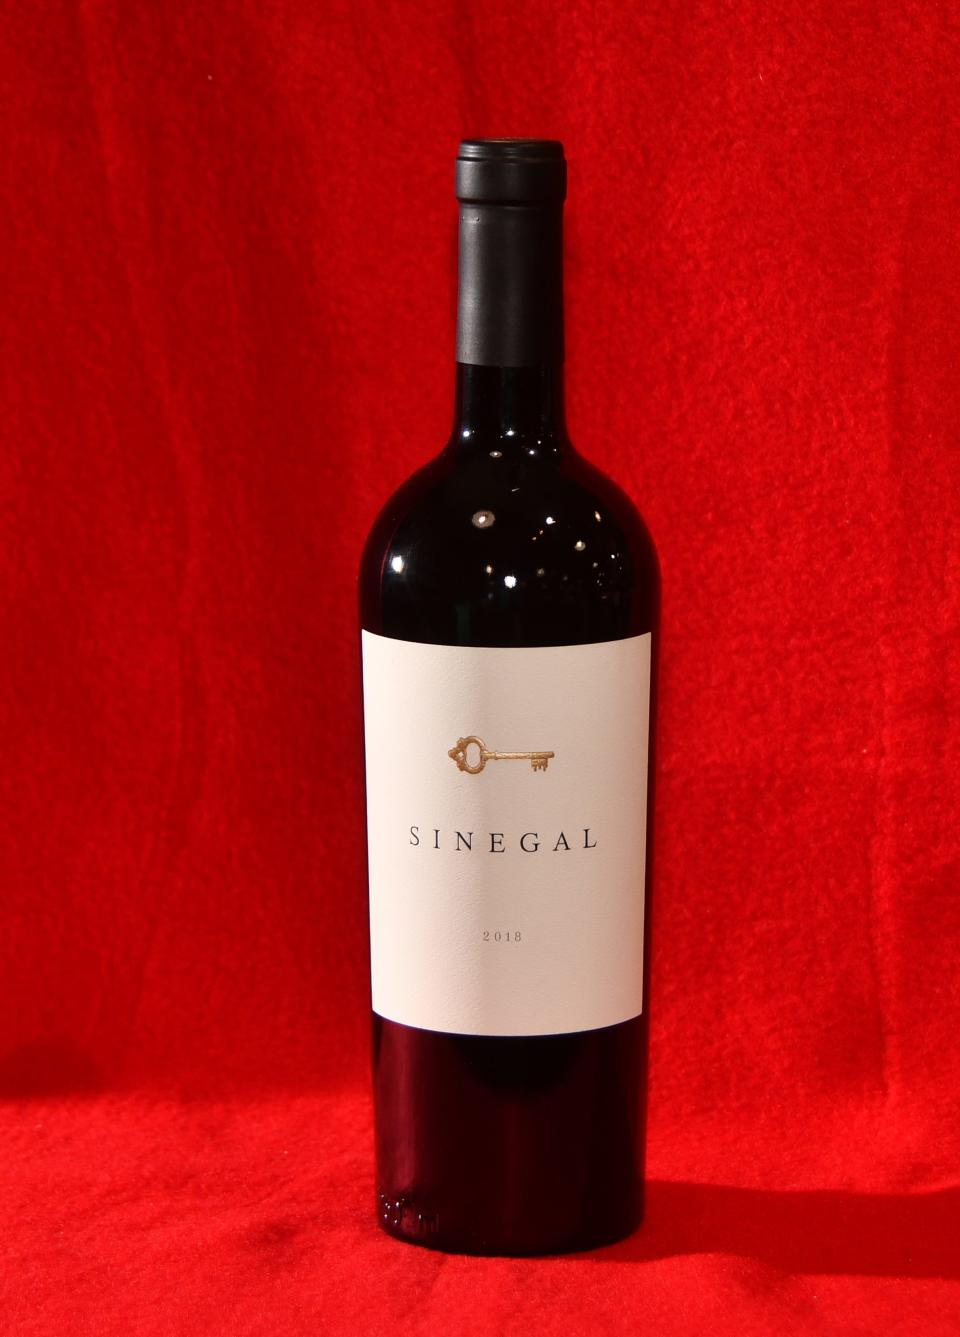 Tim Dwight's top 10 wines of the year:1. .Wine of the Year: Sinegal Napa Valley 2018 Cabernet Sauvignon